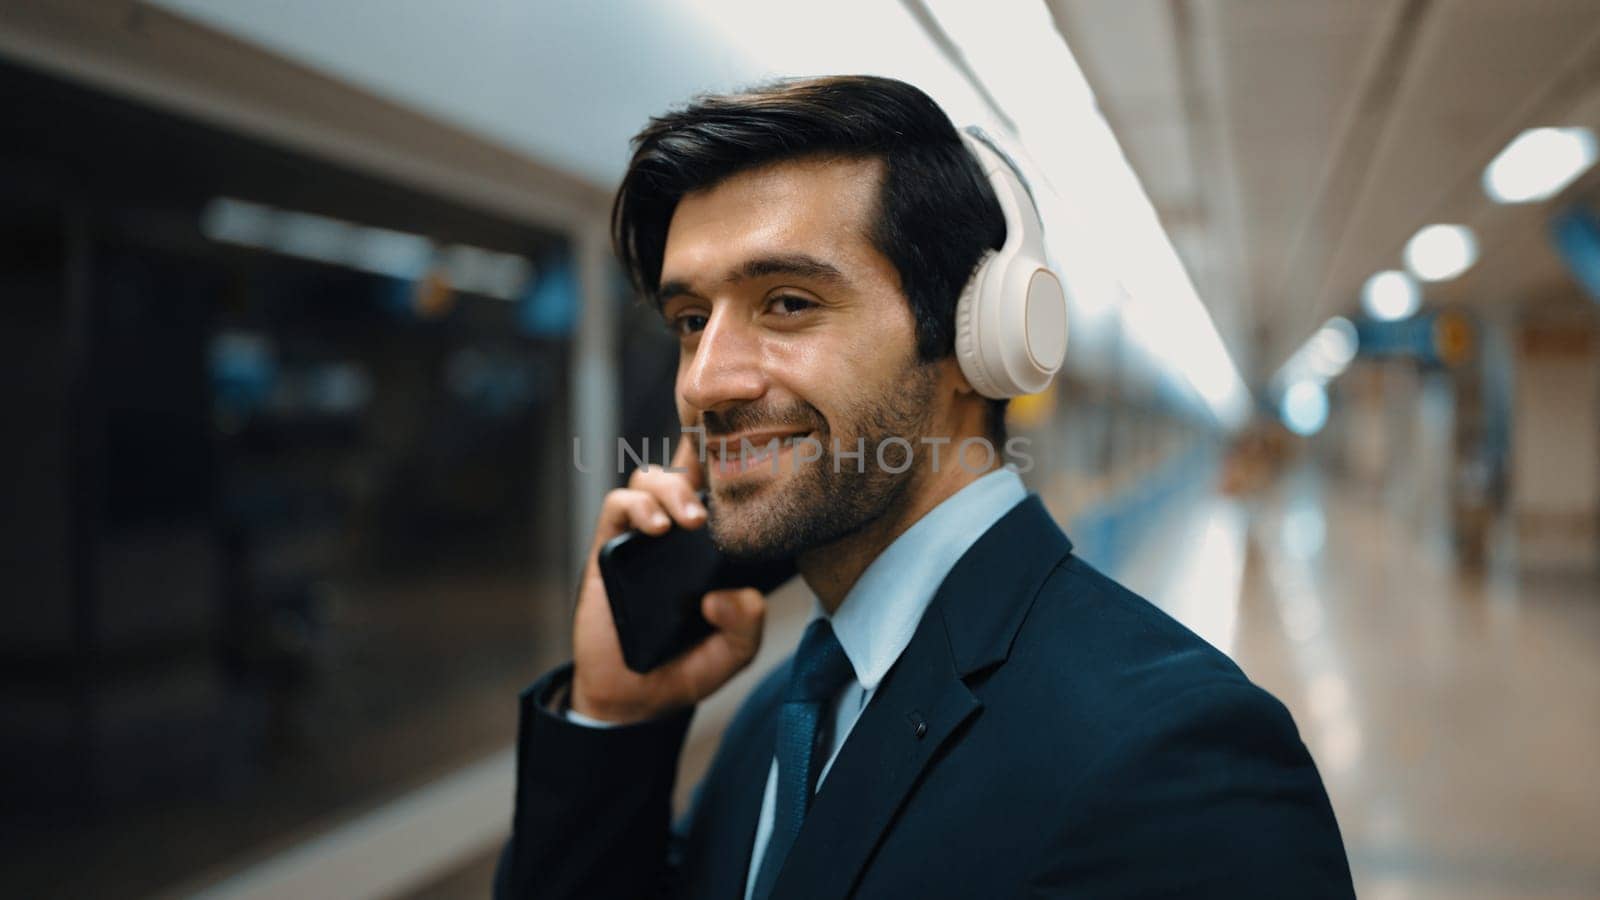 Smart business man calling phone while wearing headphone at train station. Professional executive manager talking to colleague about marketing strategy while waiting for train or subway. Exultant.